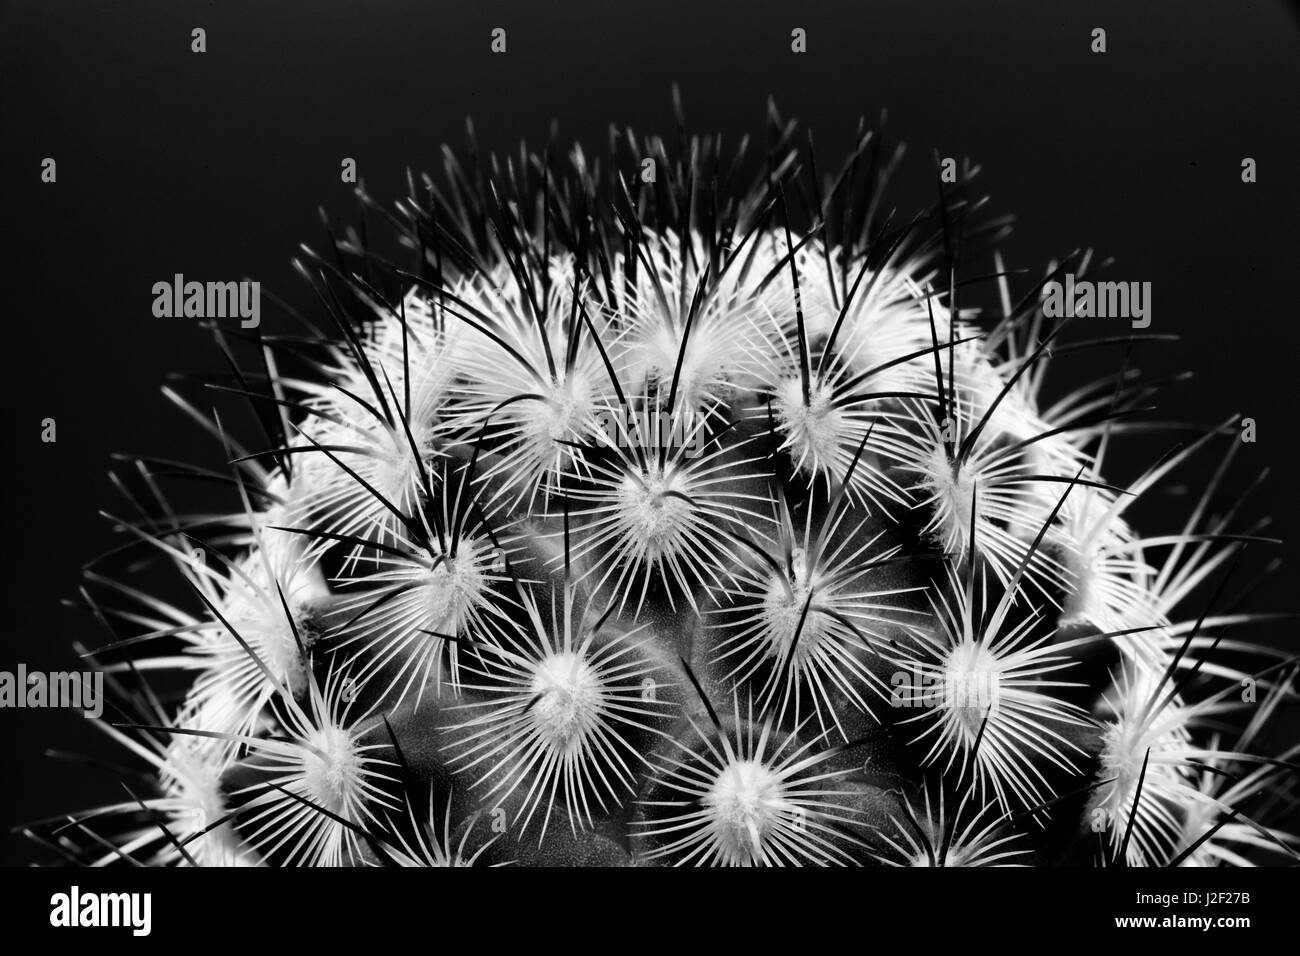 Black and White pattern of small cactus spines Stock Photo